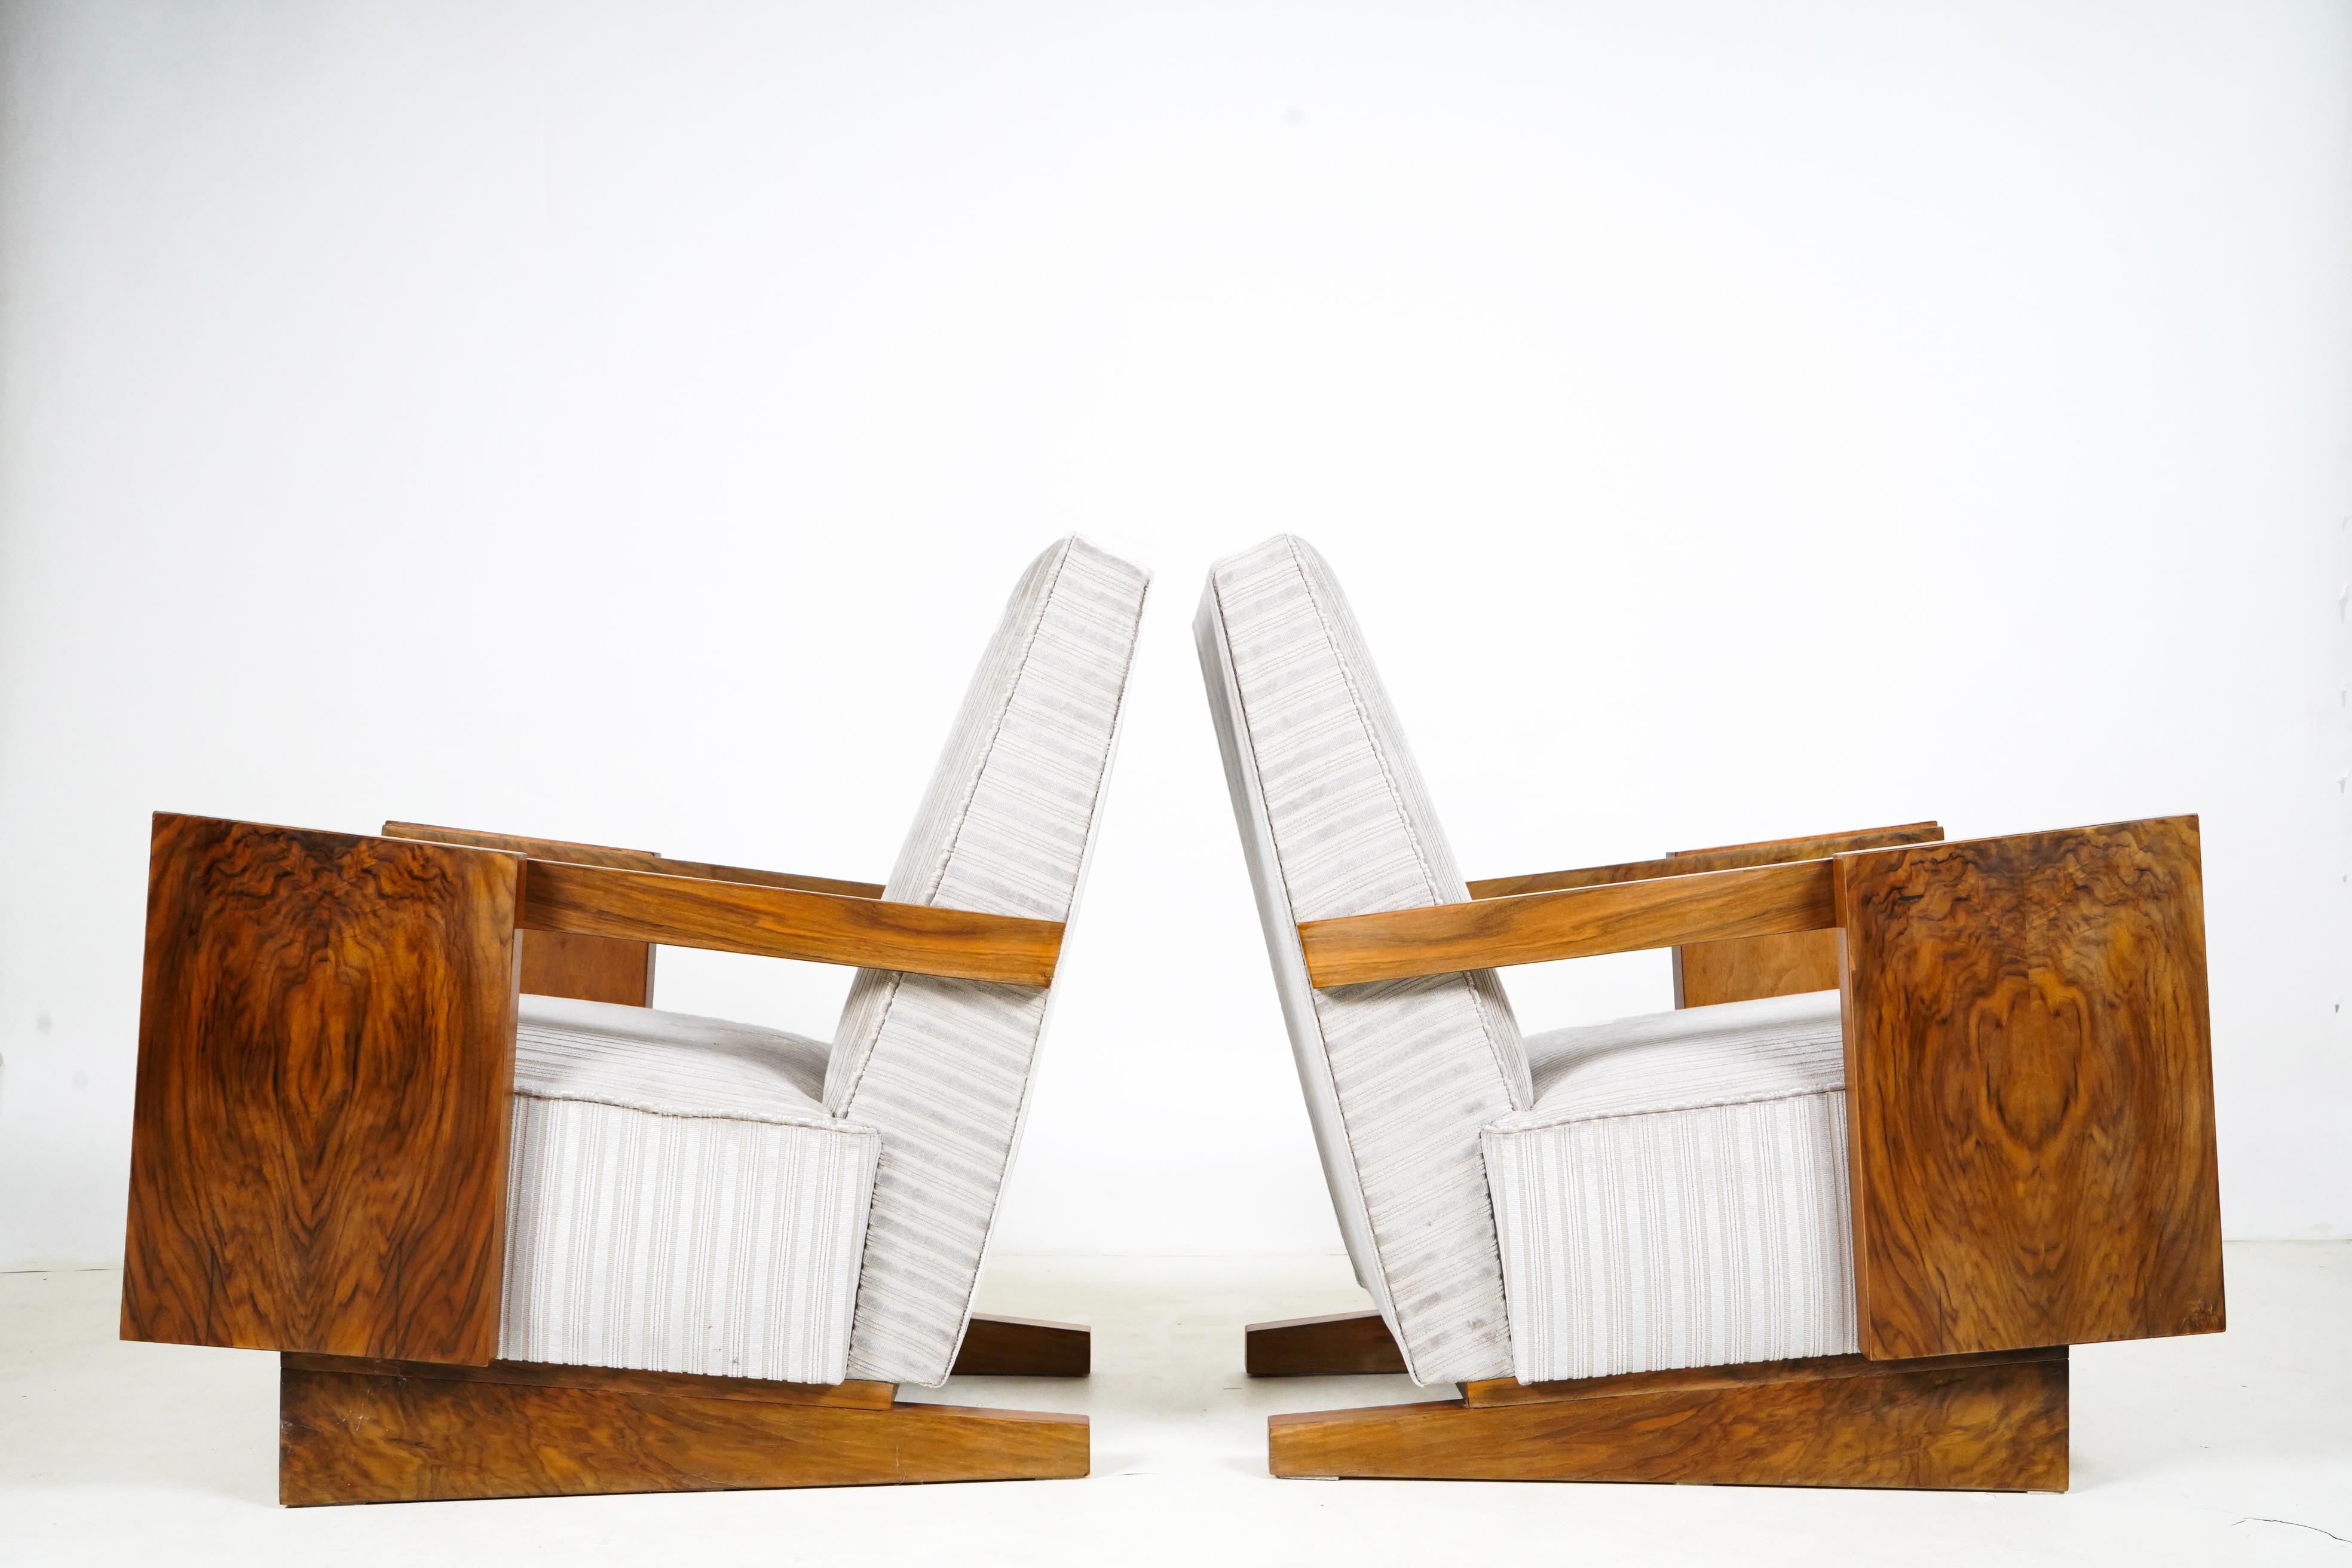 This pair of boldly angular armchairs date to the Socialist Period in Hungary, around 1970. Hungarian furniture makers mastered the art of making veneered furniture as early as the Biedermeier Period (early 1800s). They thrived through the interwar